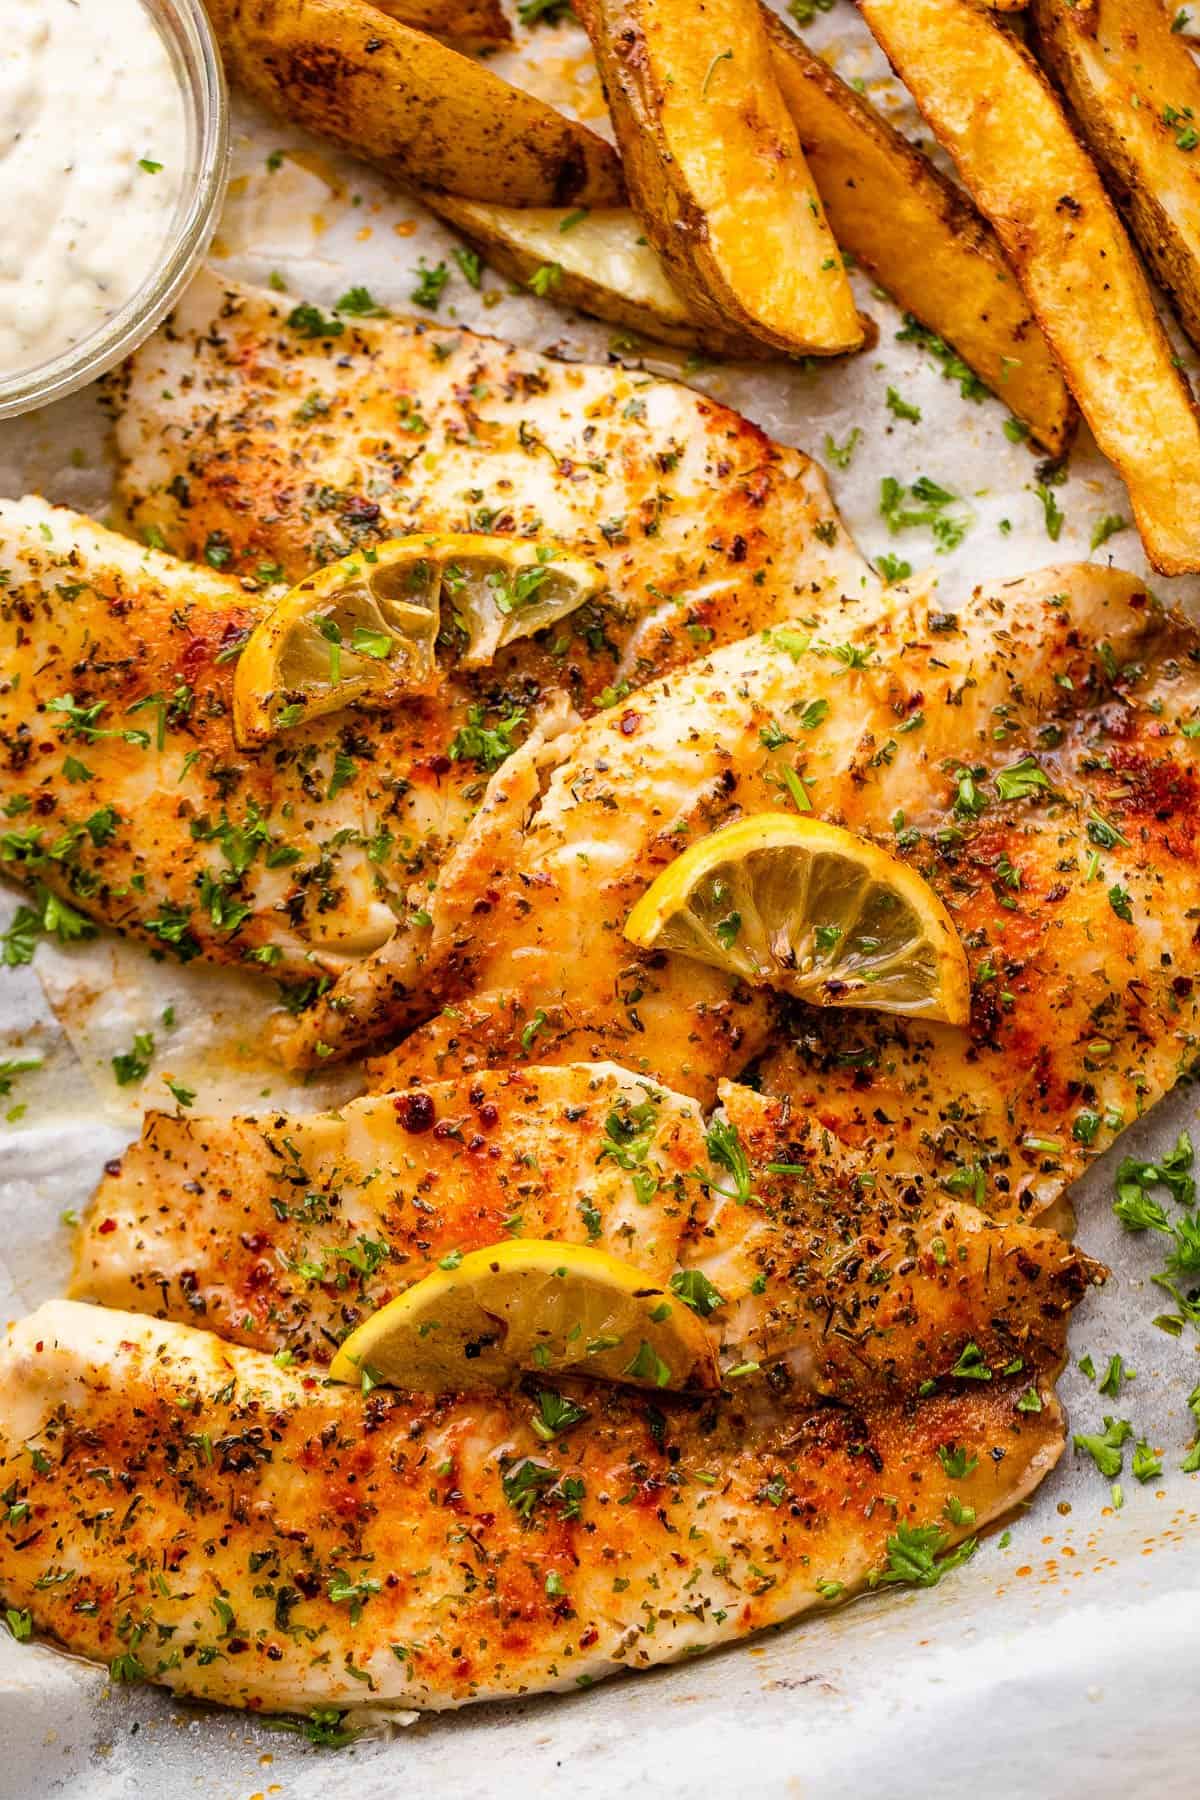 three tilapia fish fillets topped with lemon slices.